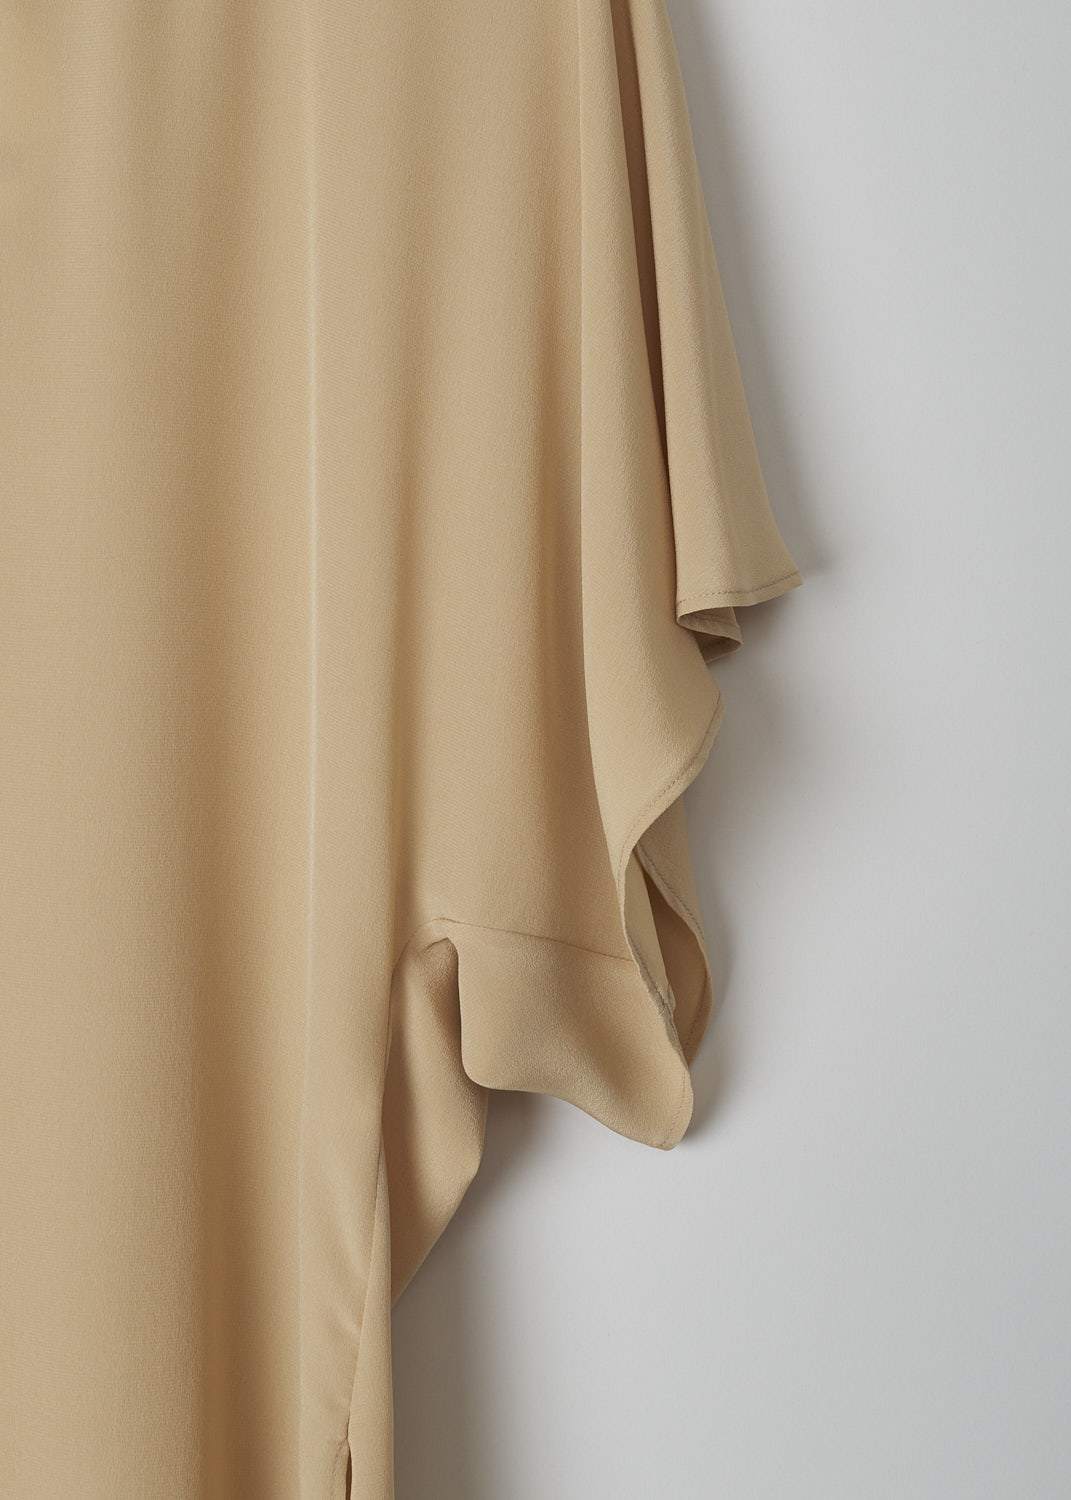 CHLOÉ, PEARL BEIGE SILK TOP, CHC22UHT12004278,  Beige, Detail, This pearl beige silk top has a boat neckline and loose short cap sleeves. The top has side slits and a straight hemline. 
